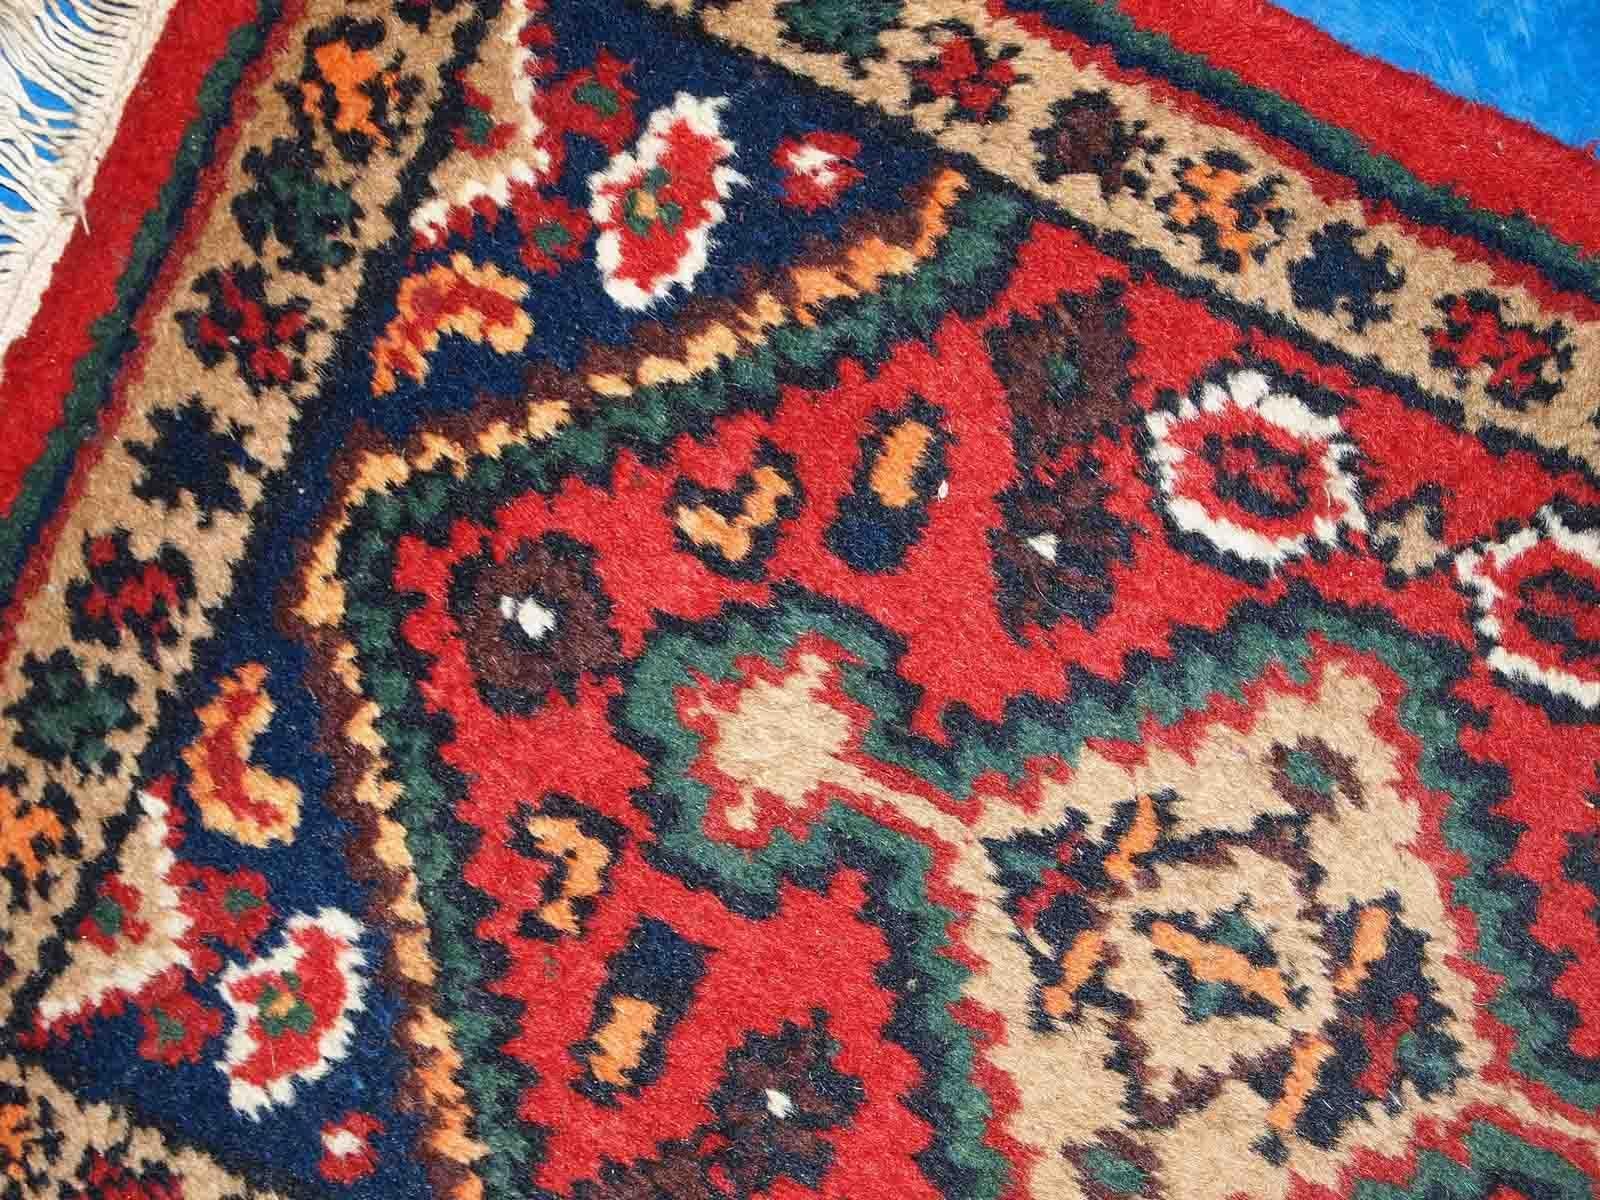 Vintage handmade Middle Eastern mat in original good condition. The rug is from the end of 20th century.

-condition: original good, 

-circa: 1970s,

-size: 1.3' x 2' (41cm x 61cm),

-material: wool,

-country of origin: Middle